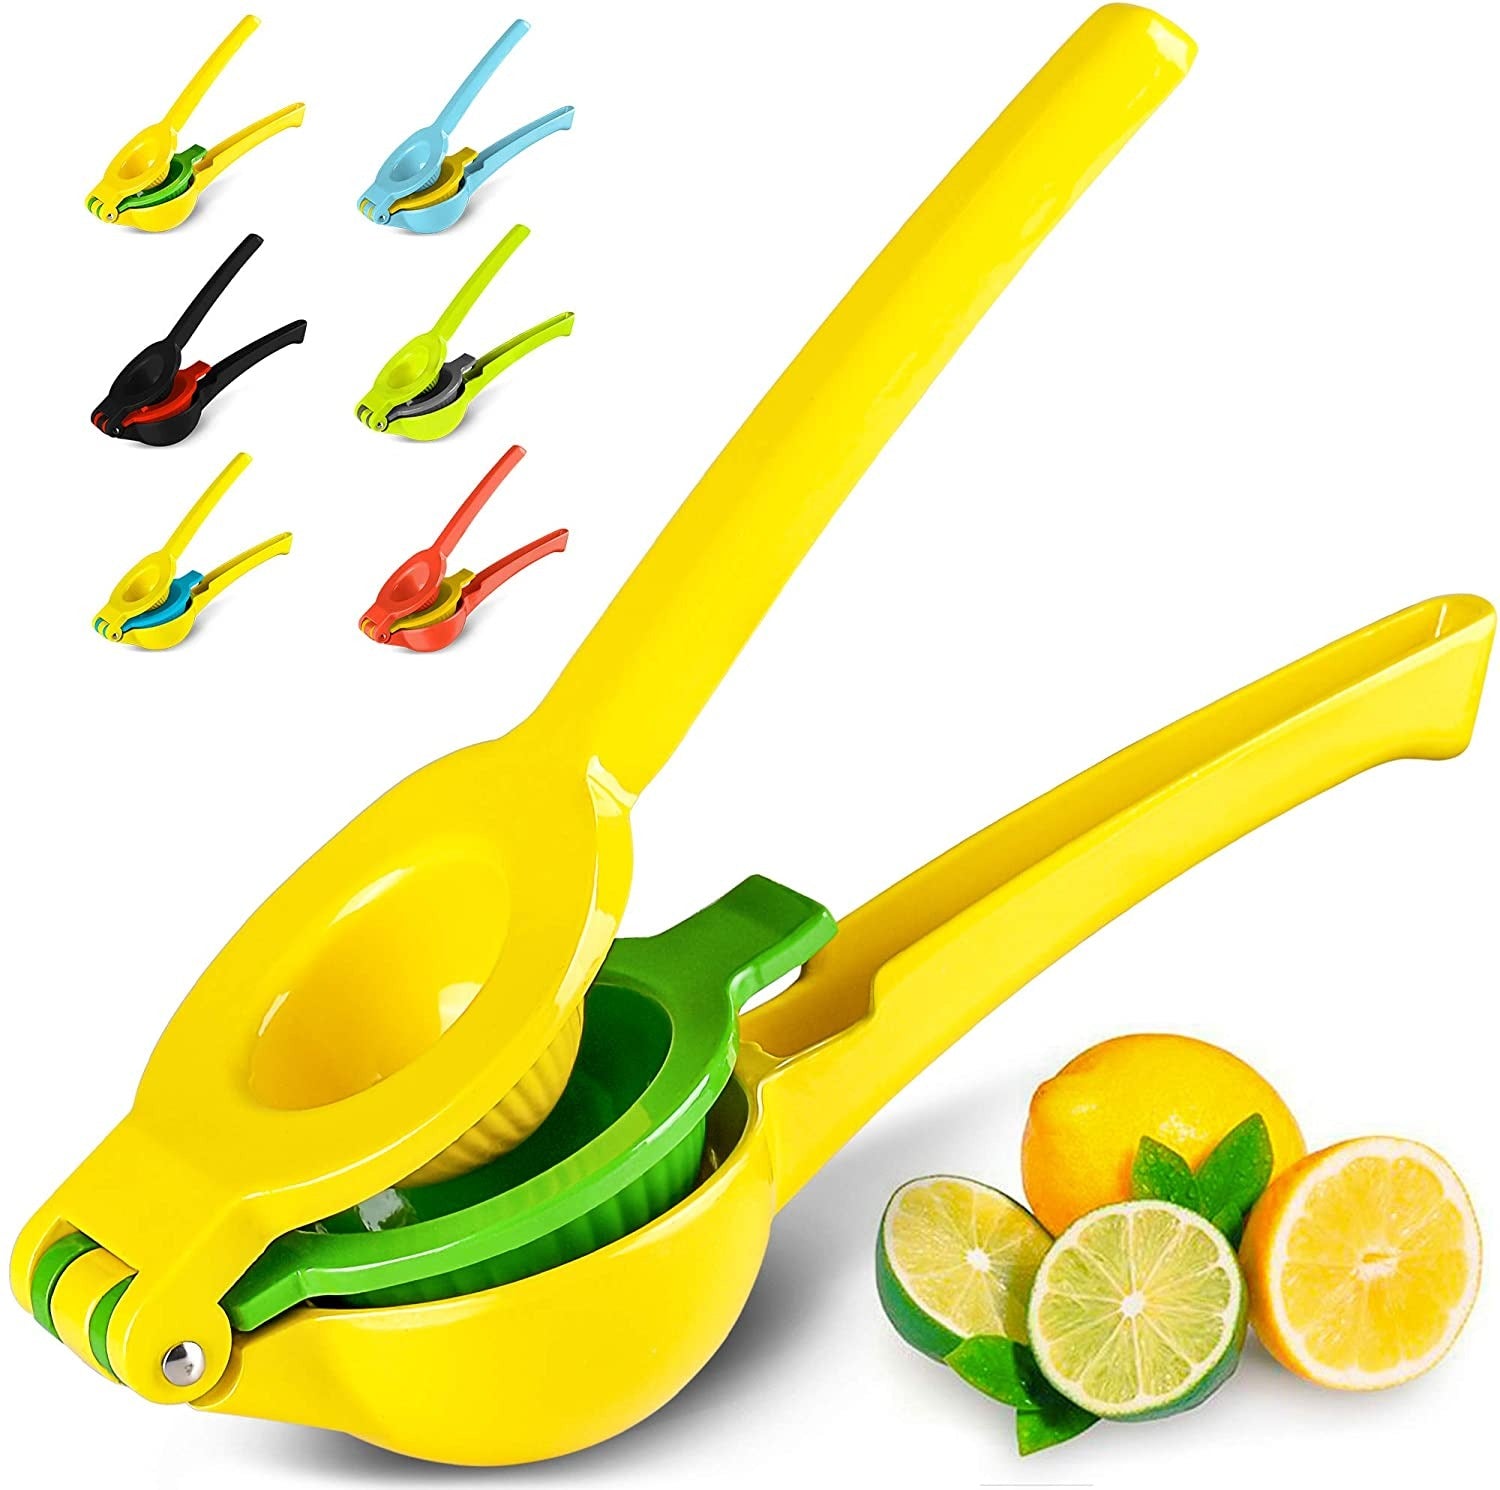 Lemon Lime Squeezer - Manual Press Citrus Juicer For Squeeze Freshest Juice - Yellow + Green